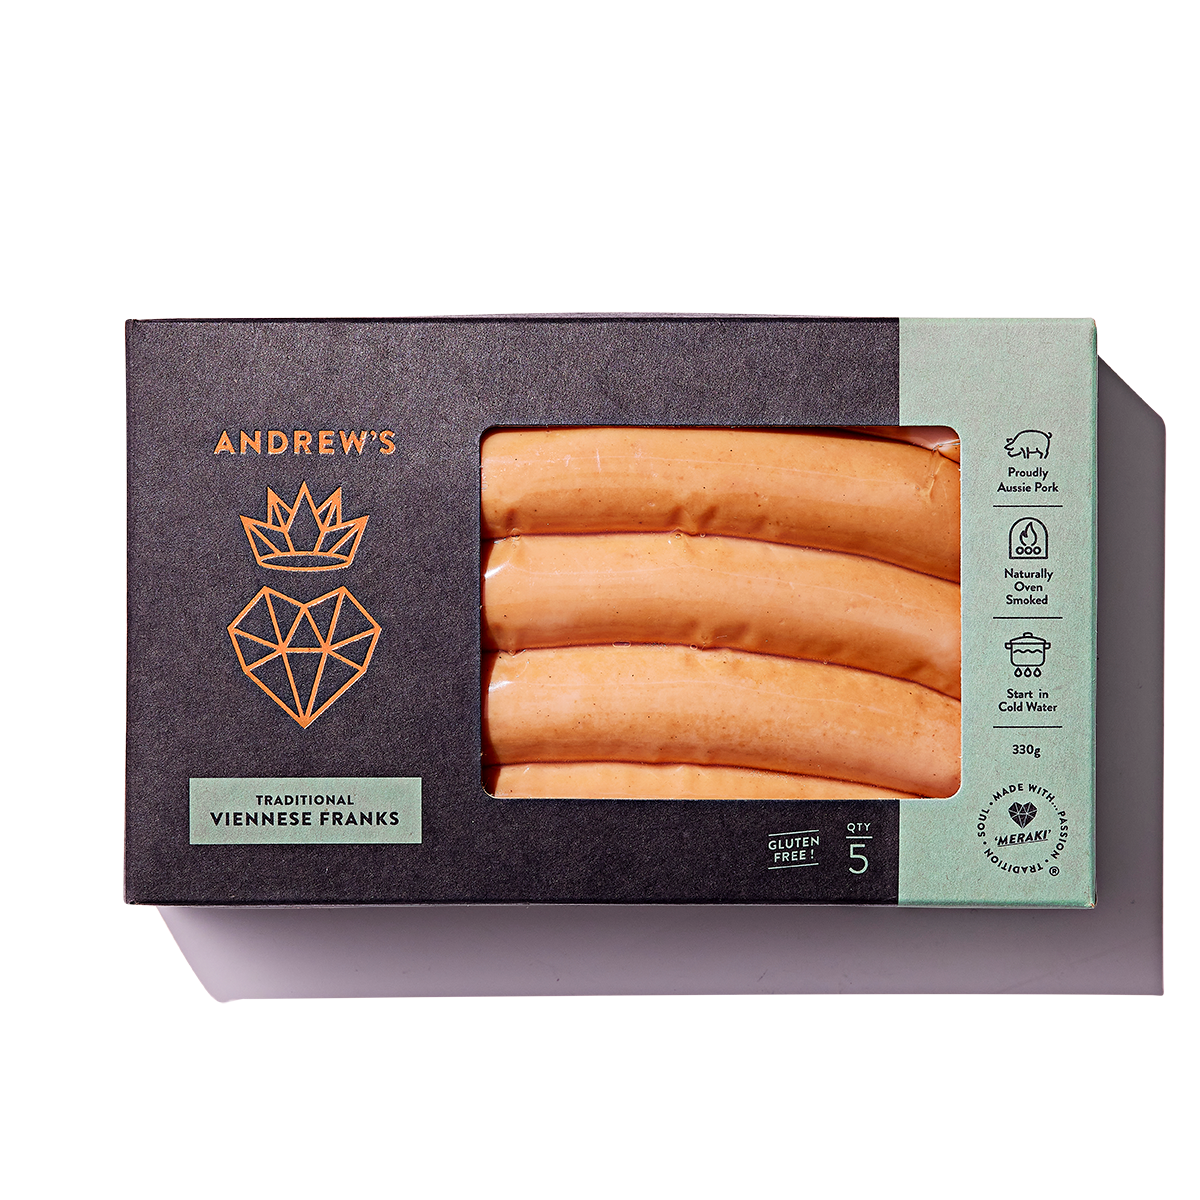 Andrew's Traditional Viennese Franks, Gluten Free